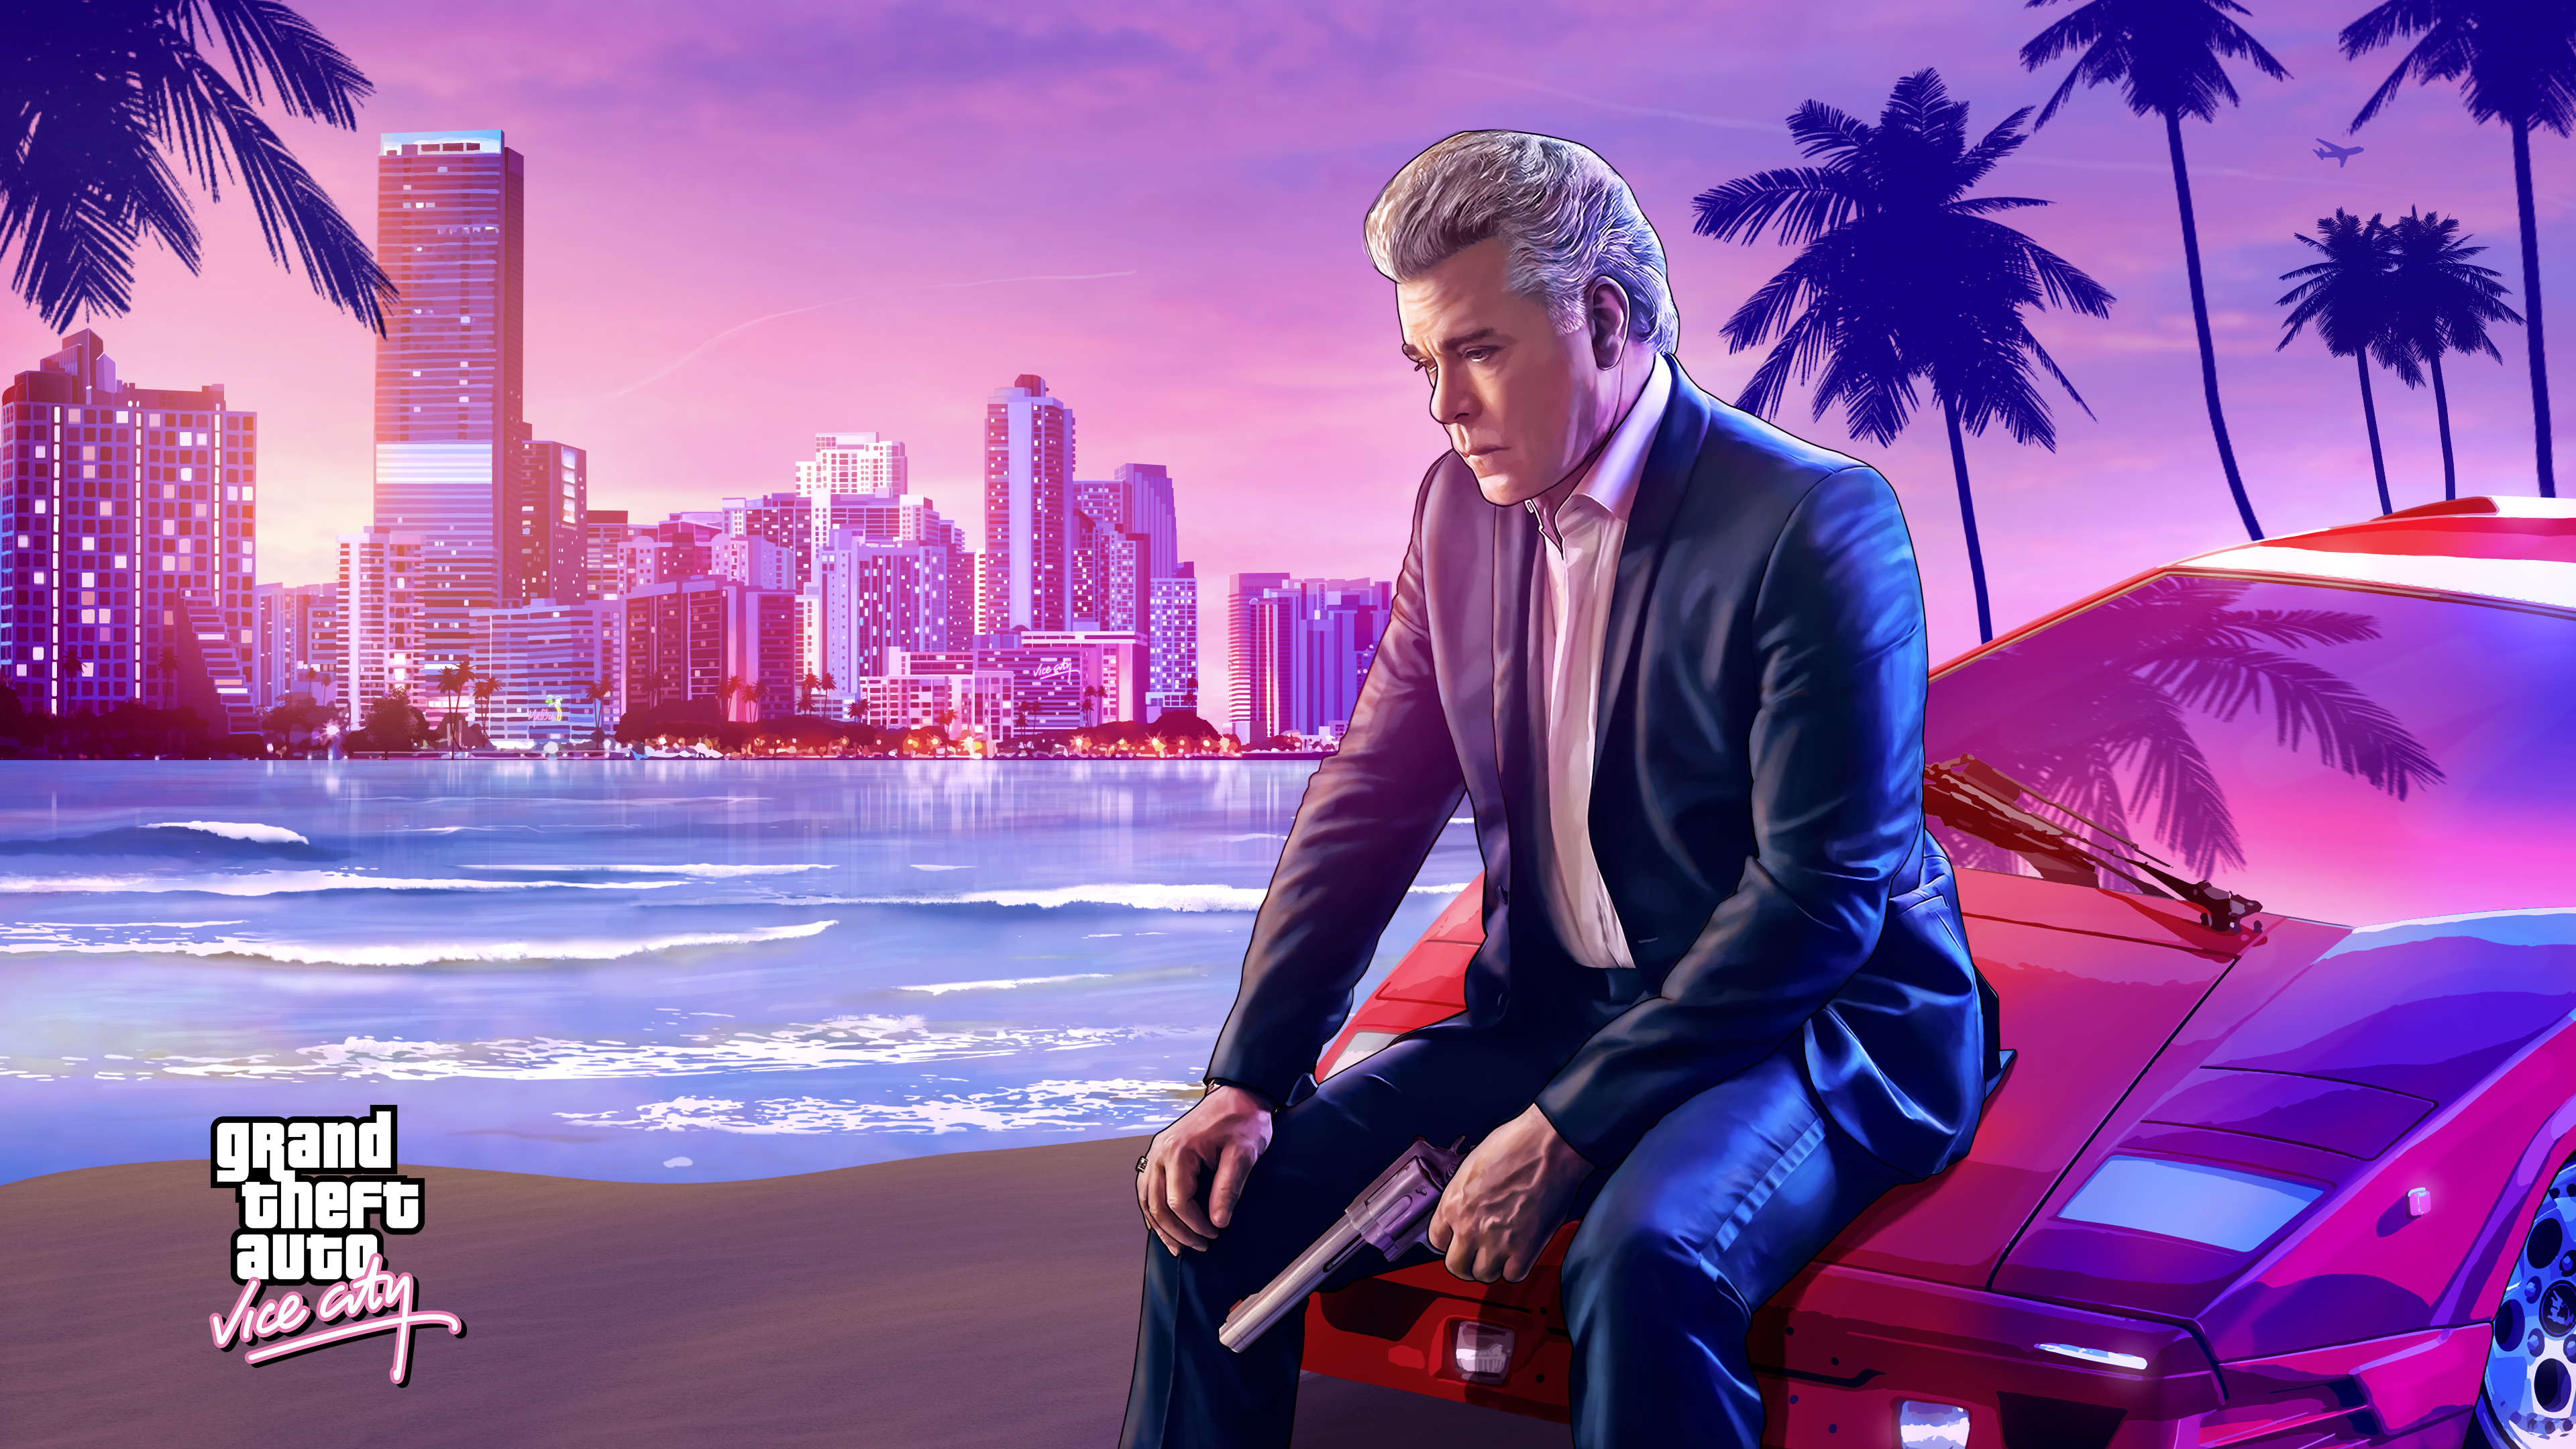 Here's a GTA wallpaper of Ray Liotta as an aged Tommy Vercetti that I made. It's in 4k so feel free to download it